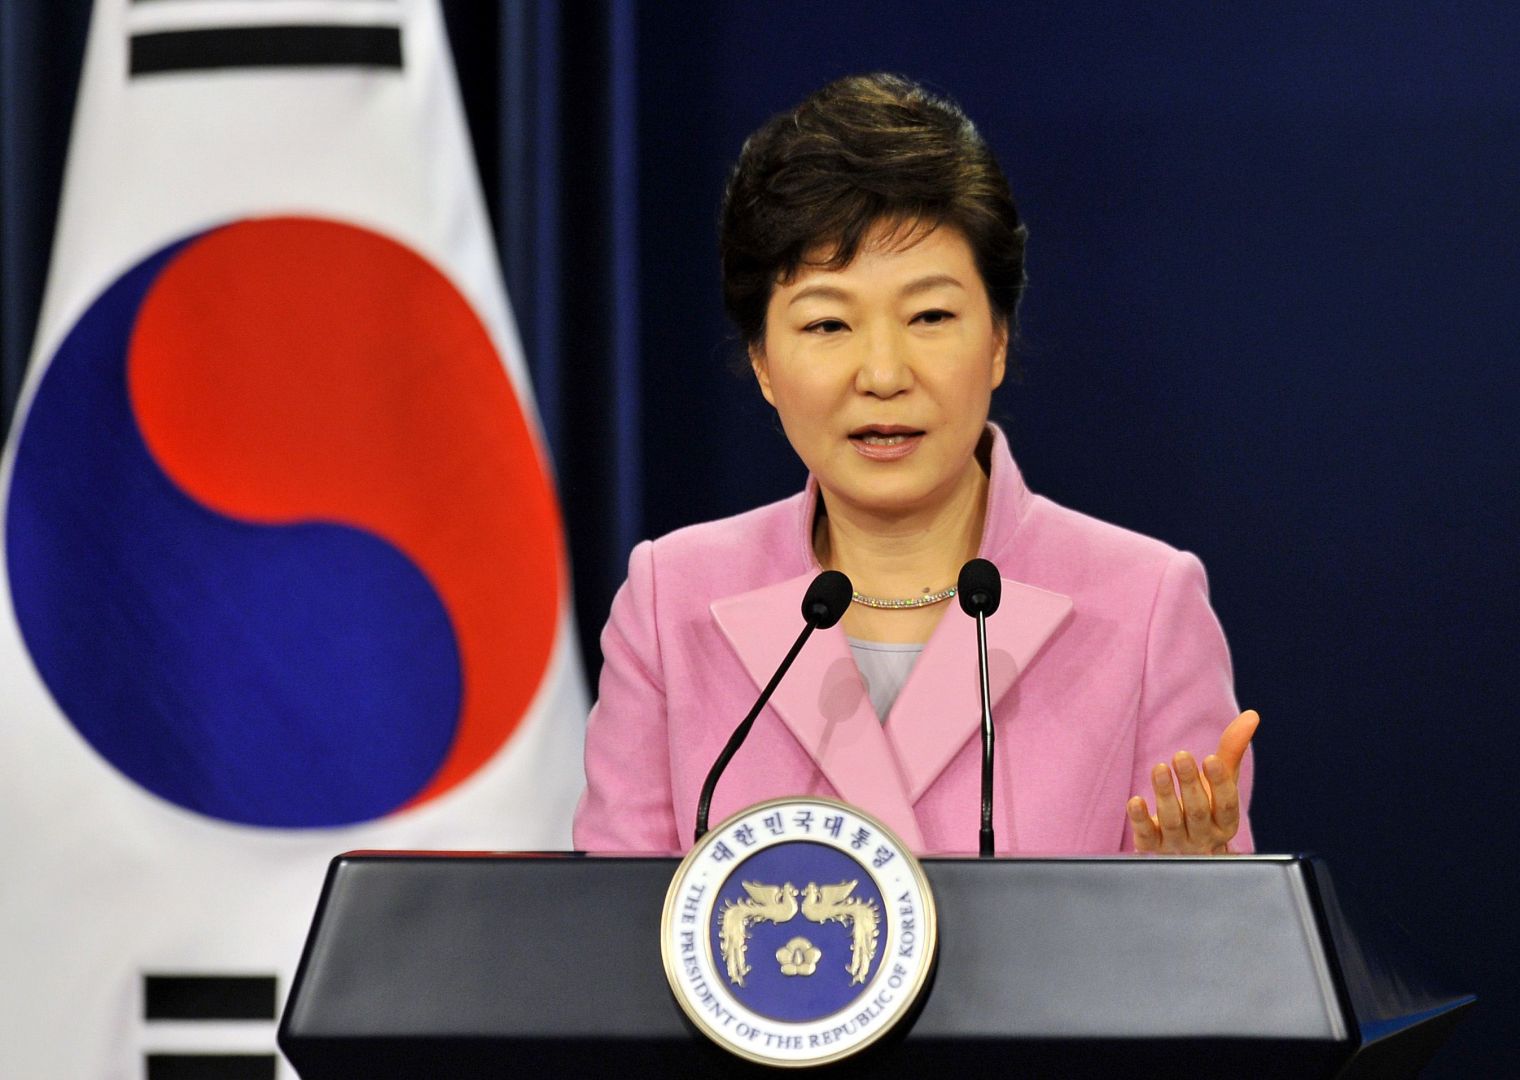 S.Korea: Protests against US Anti-Missile System, President Defends Deployment